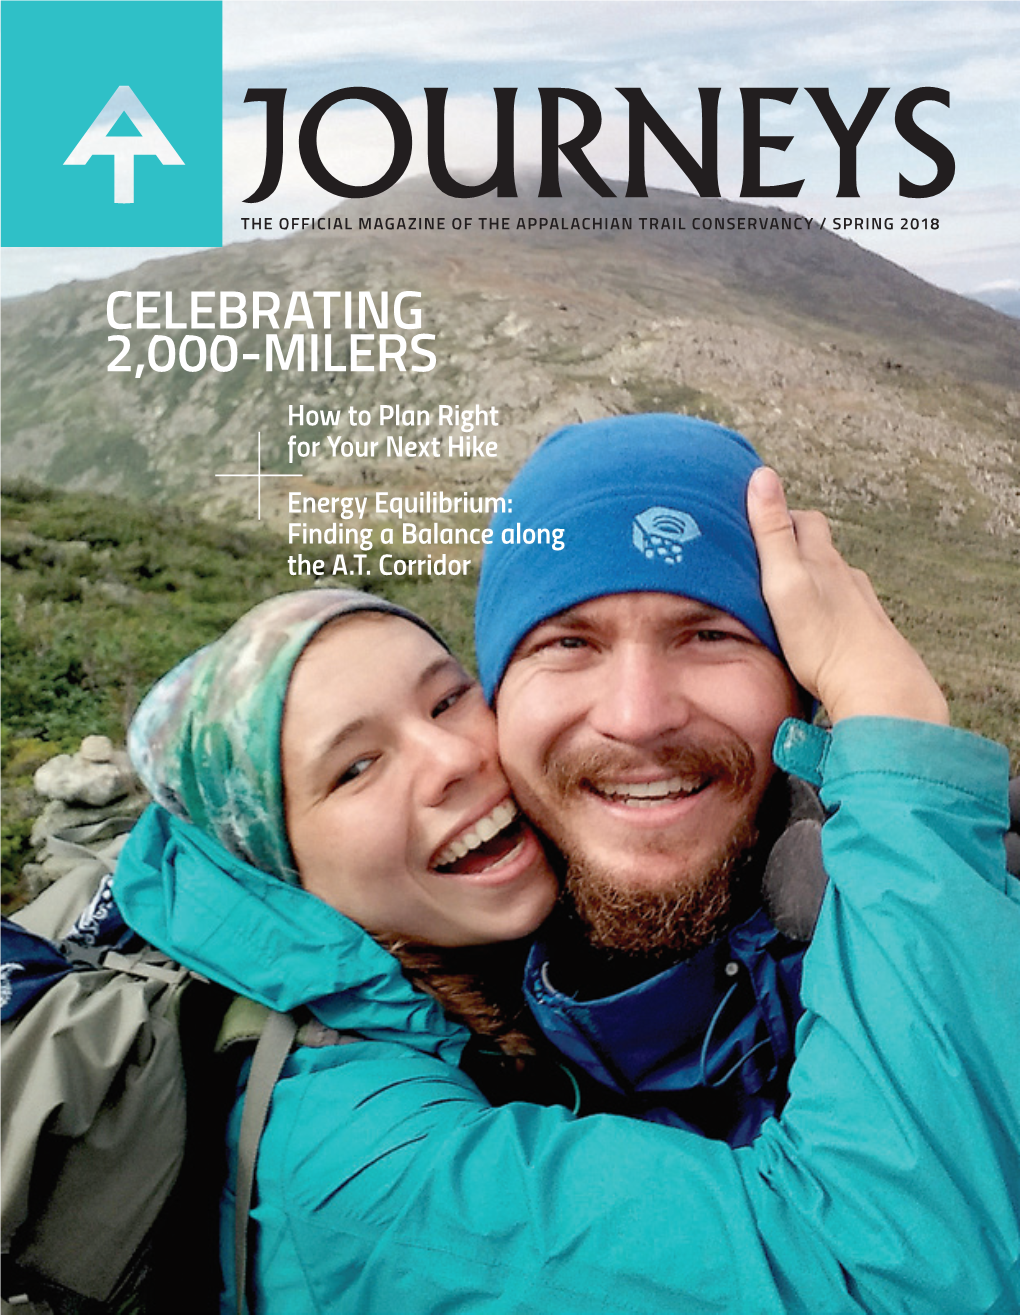 CELEBRATING 2,000-MILERS How to Plan Right for Your Next Hike Energy Equilibrium: Finding a Balance Along the A.T